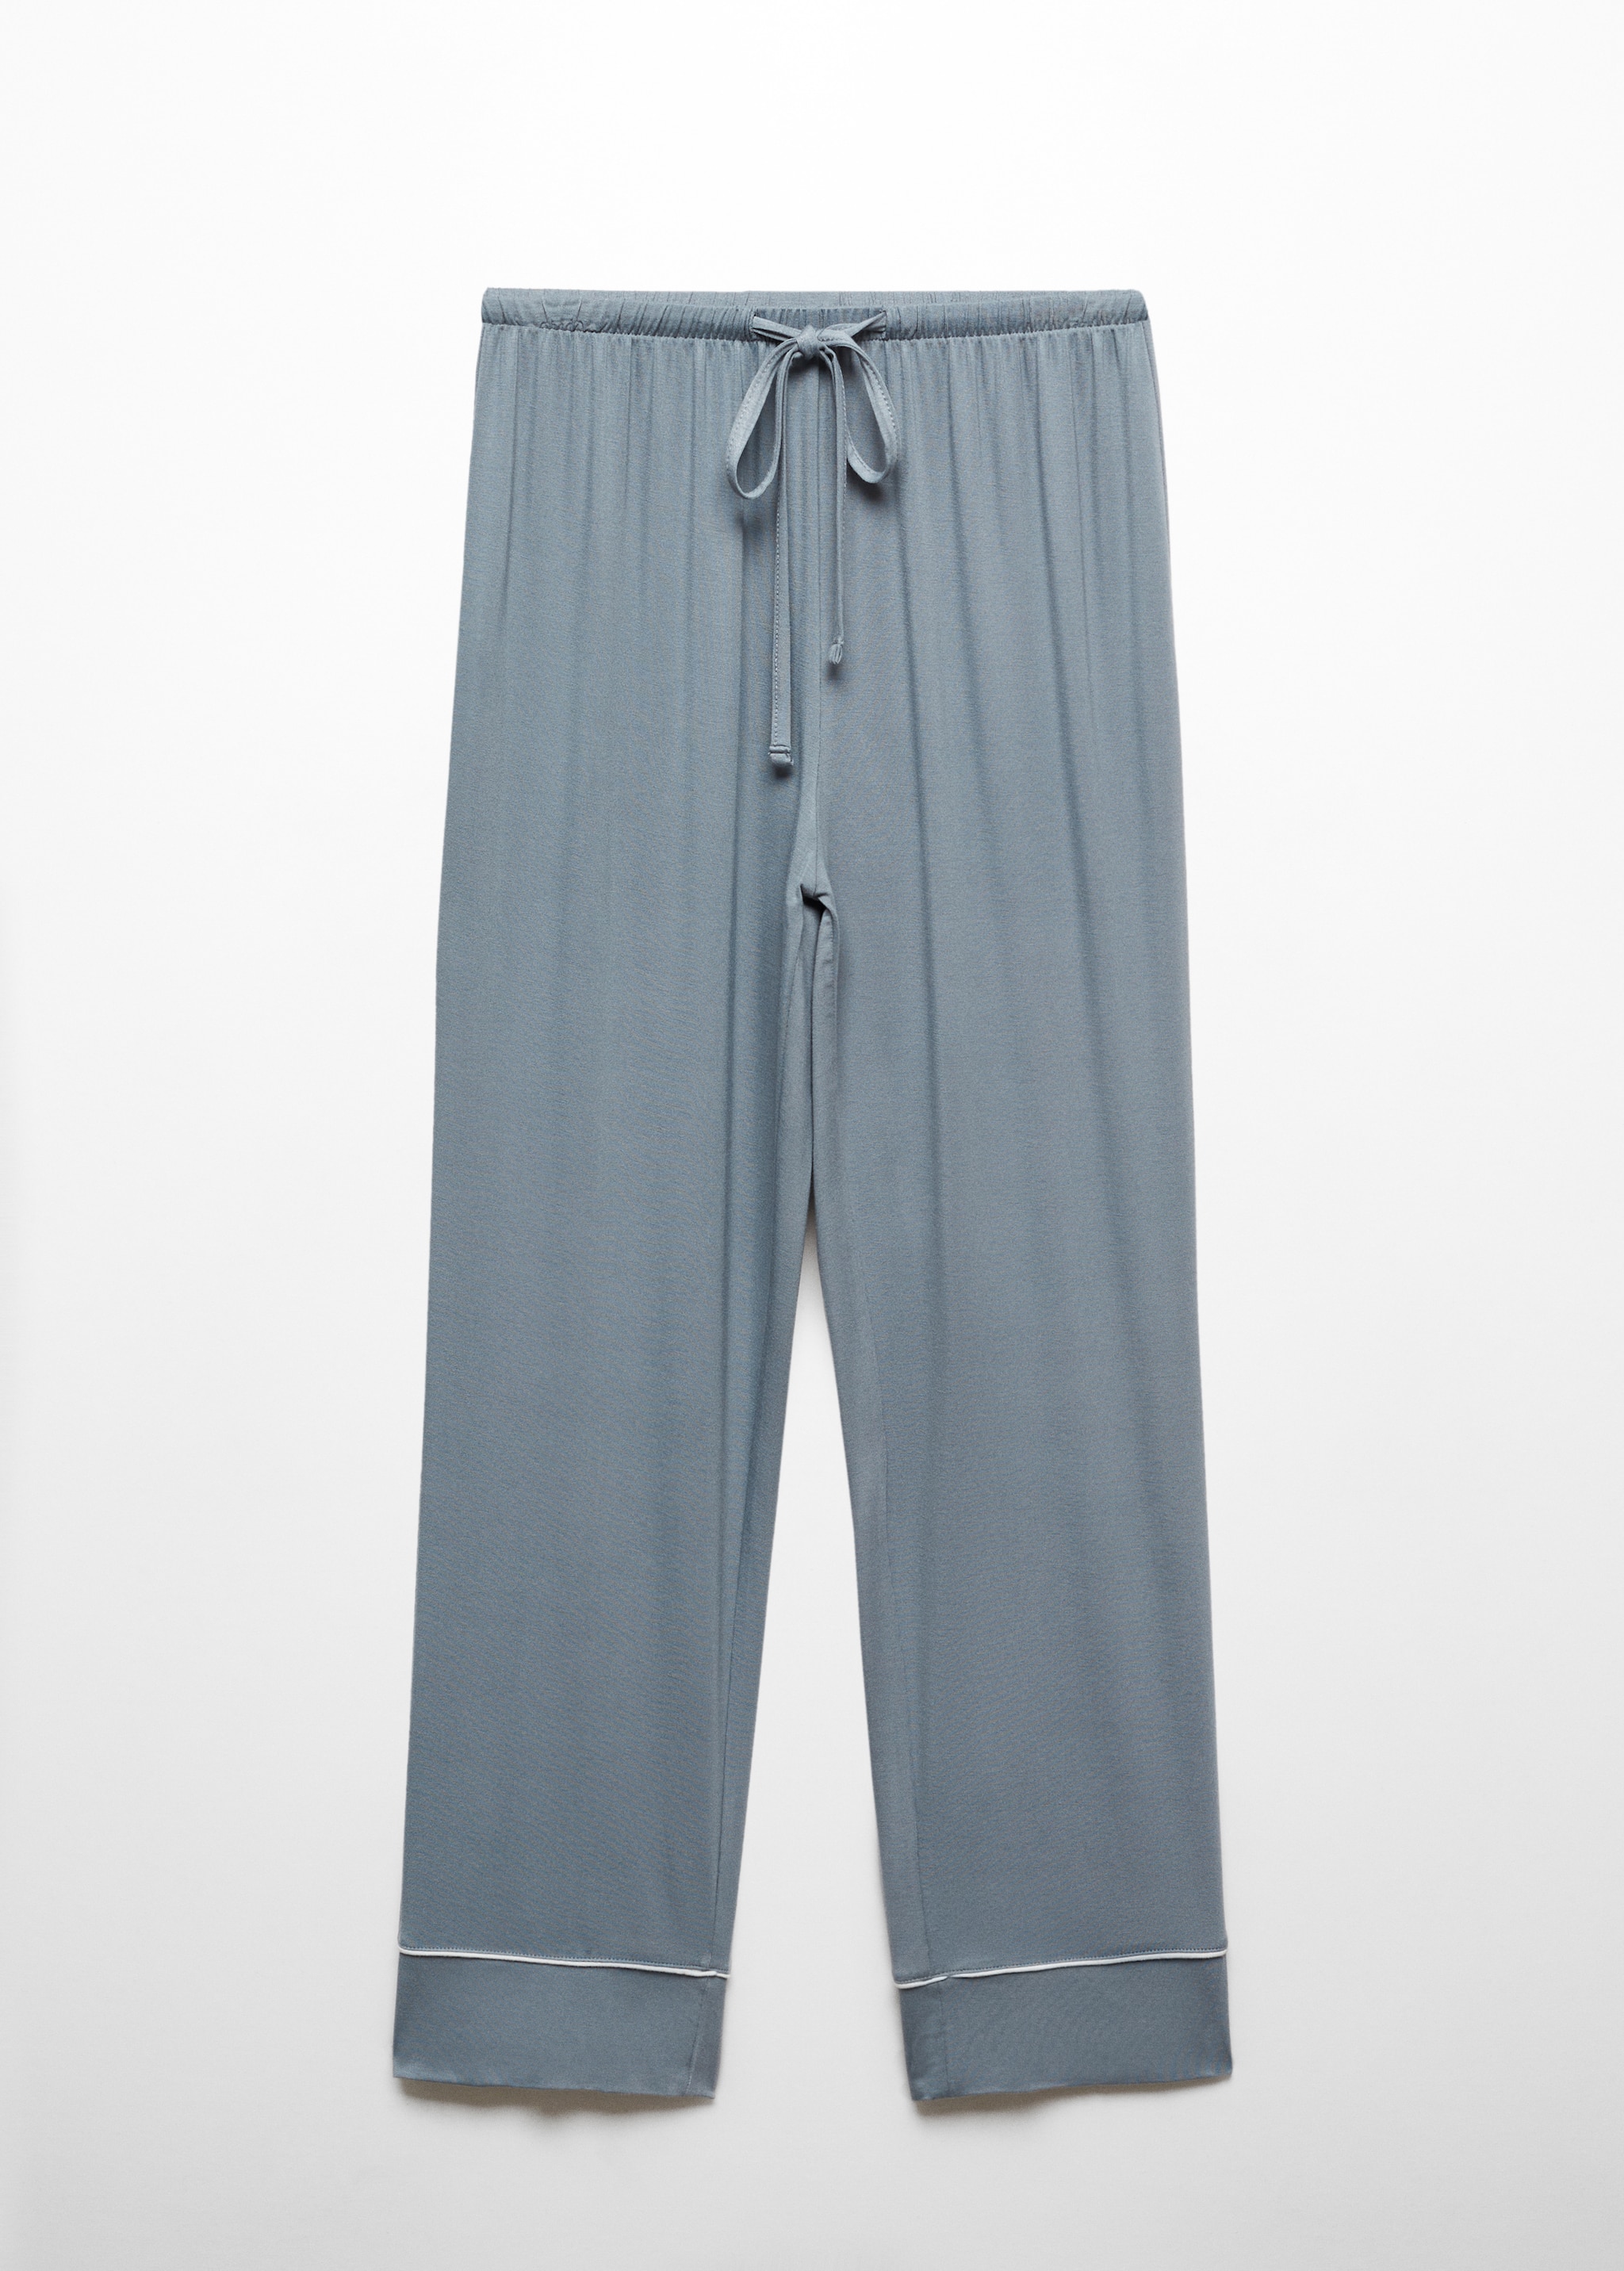 Pyjama trousers with trim - Article without model